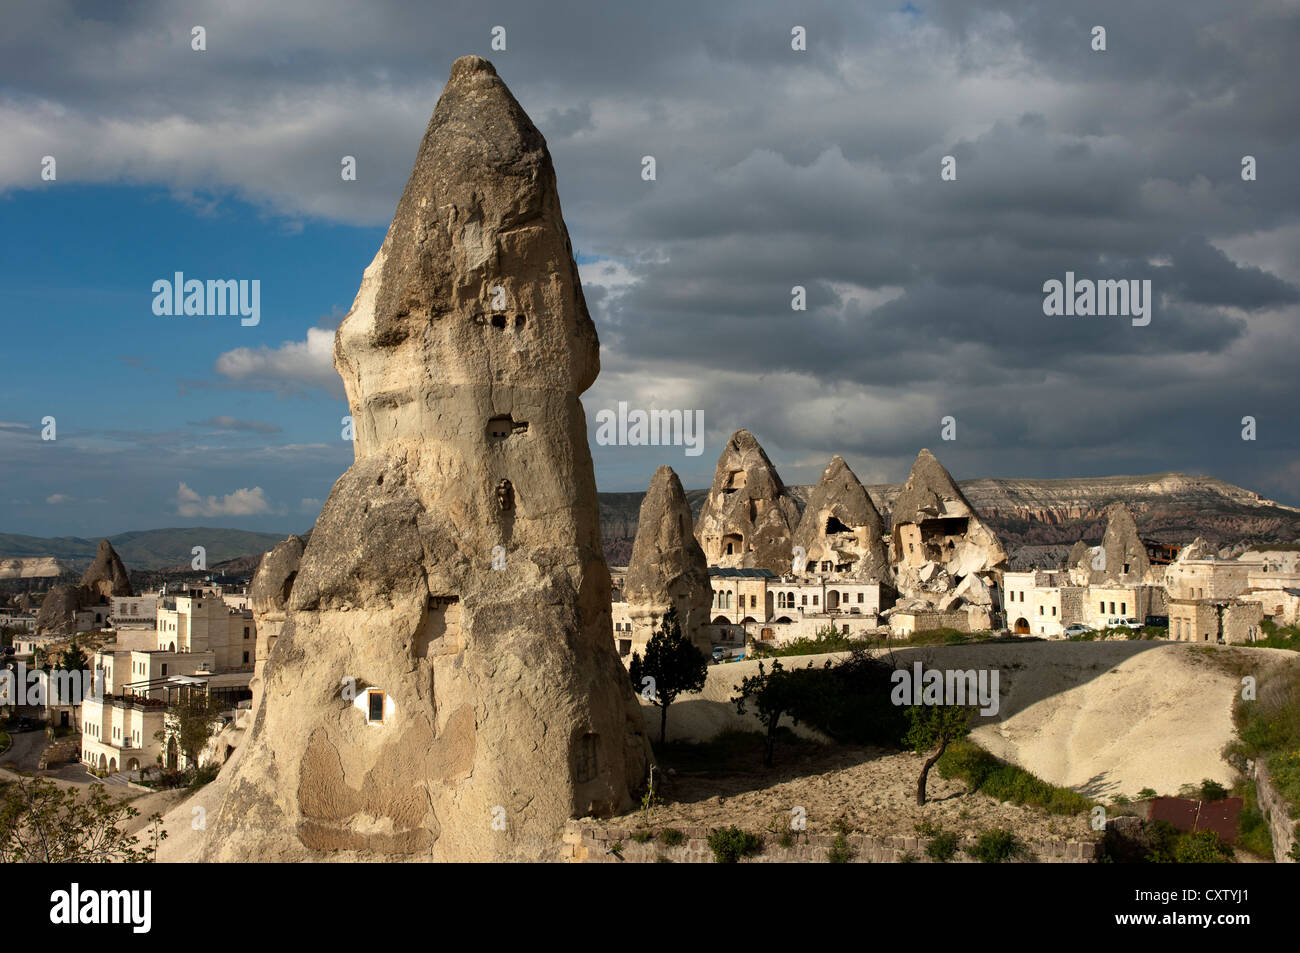 tuff rock cones or fairy chimneys with cut-out living space or storage facilities, Goreme, Cappadocia, Turkey Stock Photo